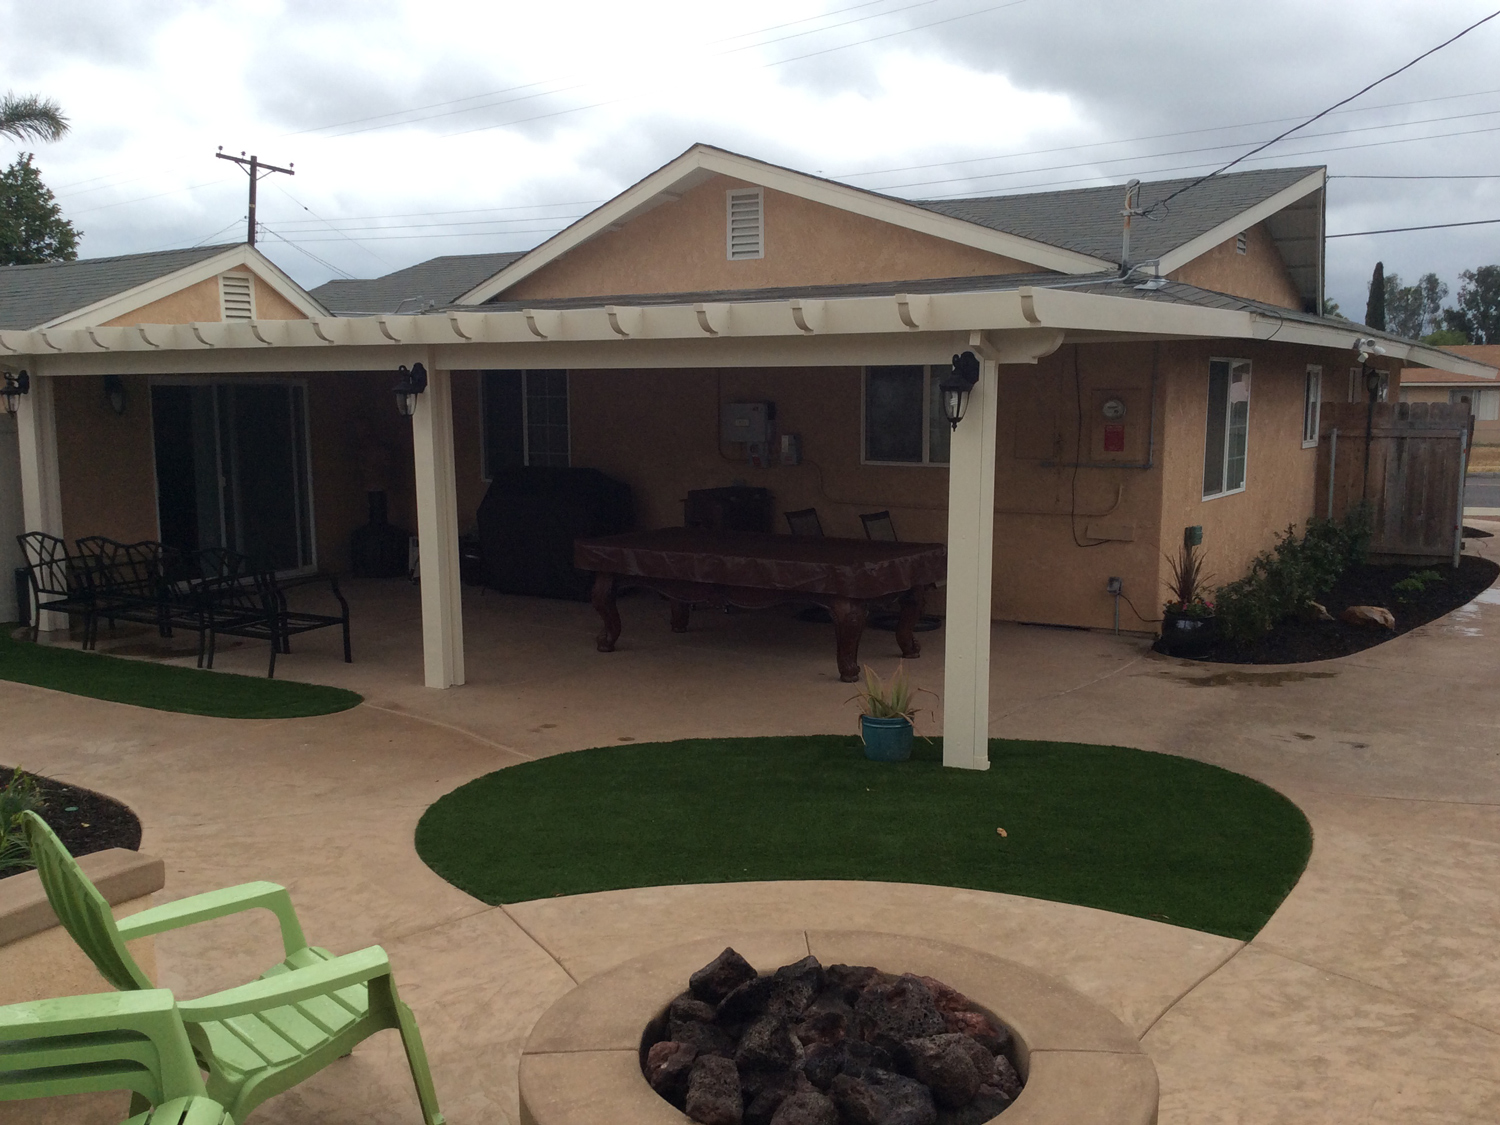 Alumawood patio cover with lights in Oceanside McCabe's Landscape Construction